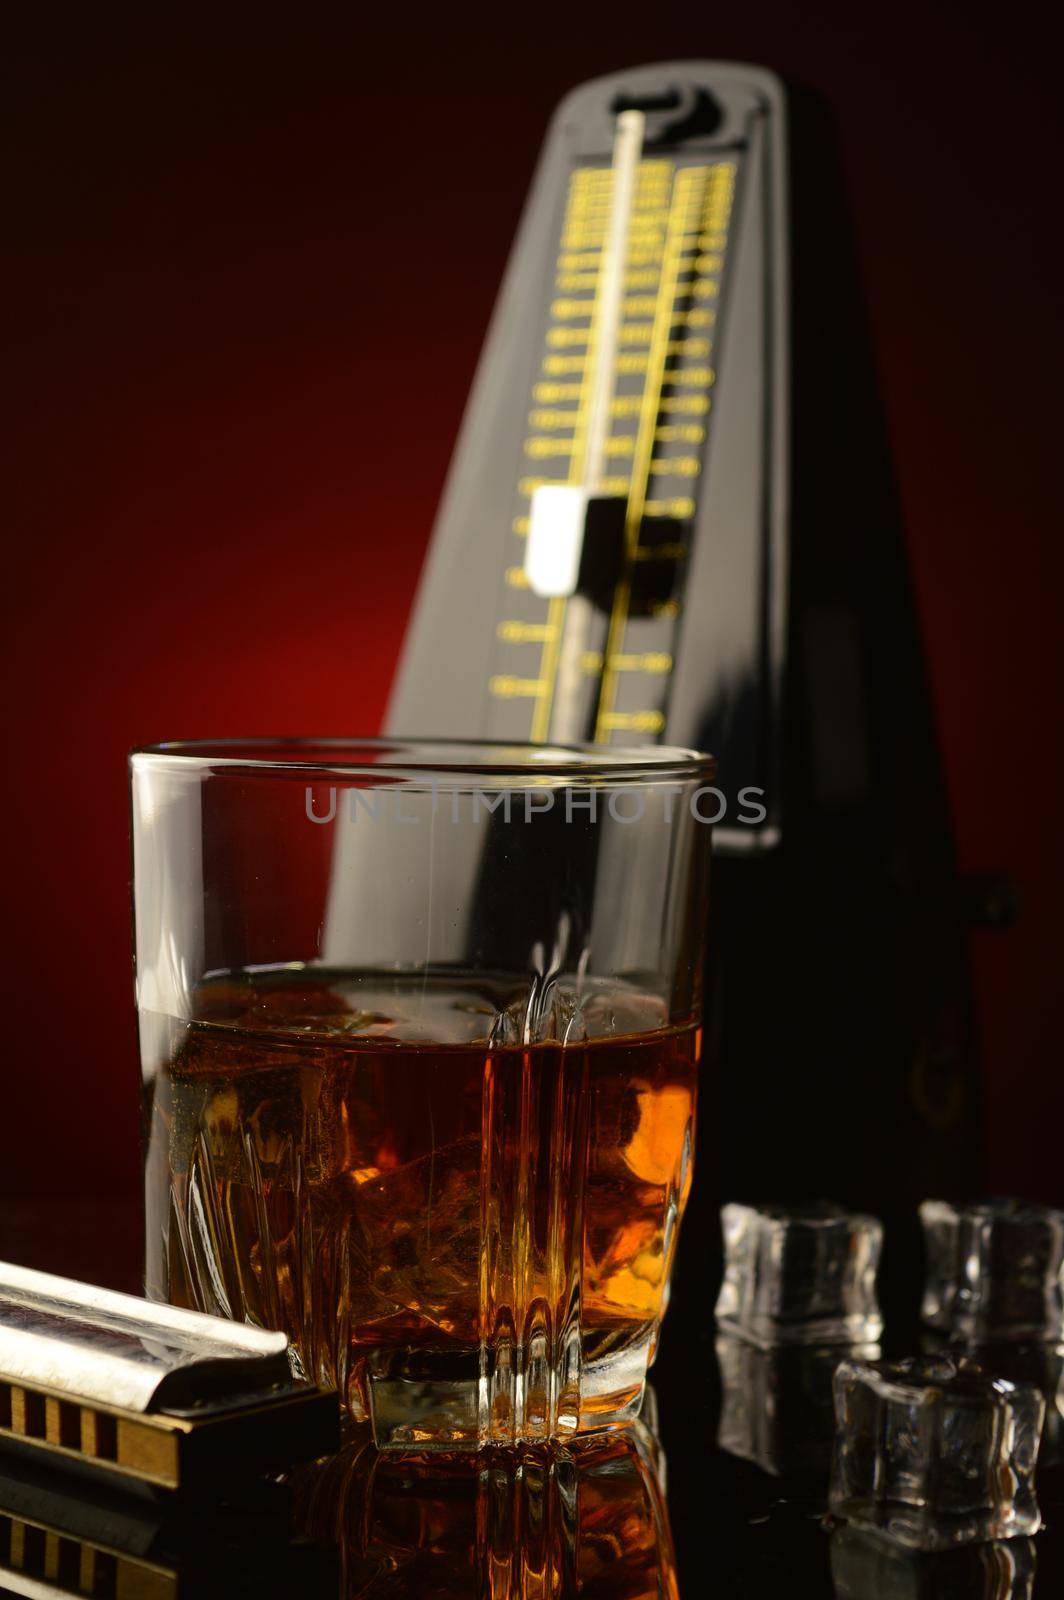 A concept of rythem and blues utilizing a glass of whiskey with a harmonica and a musical metronome over a reflective dark red and black background.